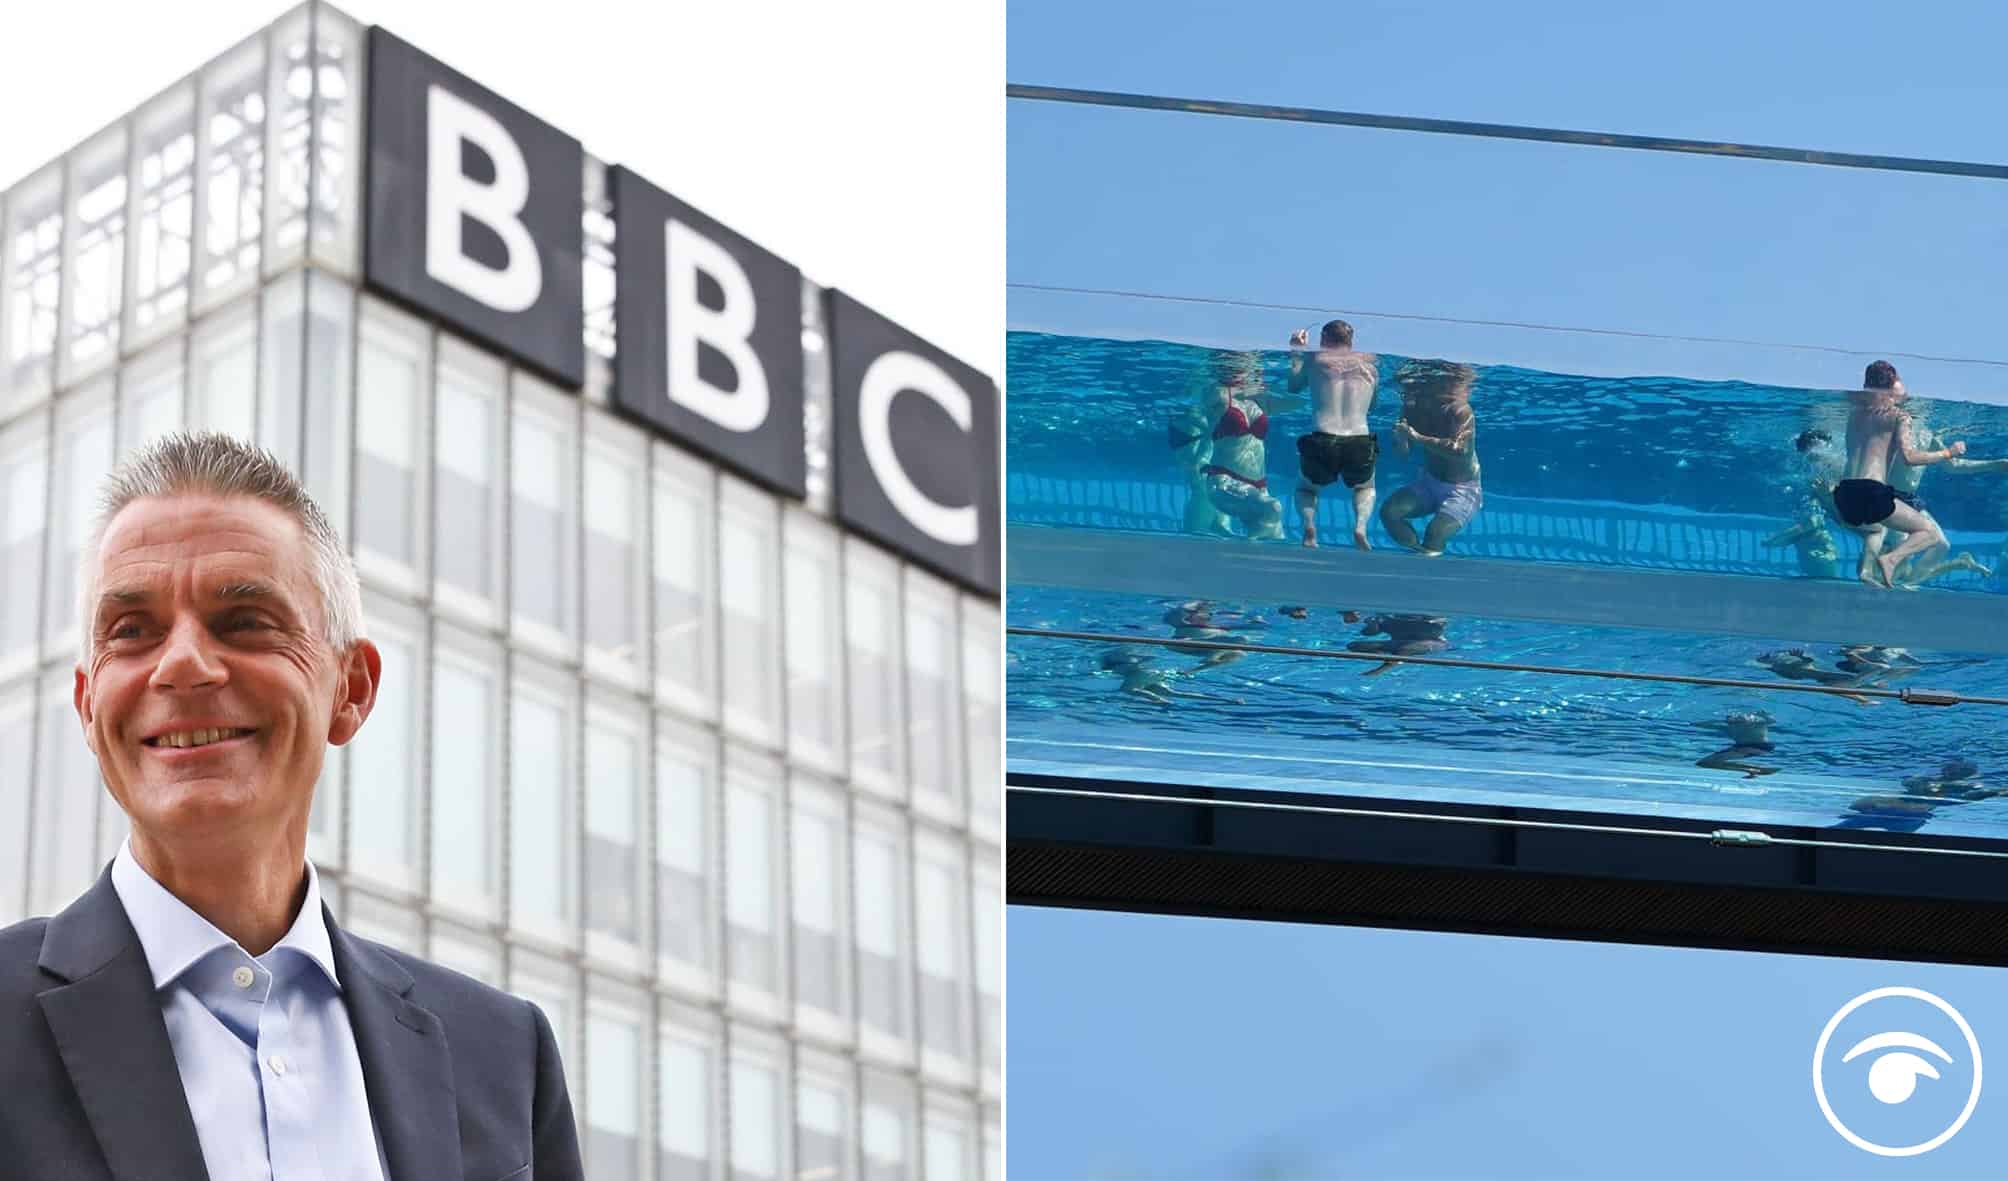 BBC ‘praises vulgar monument to UK’s escalating wealth inequality’ with sky pool footage